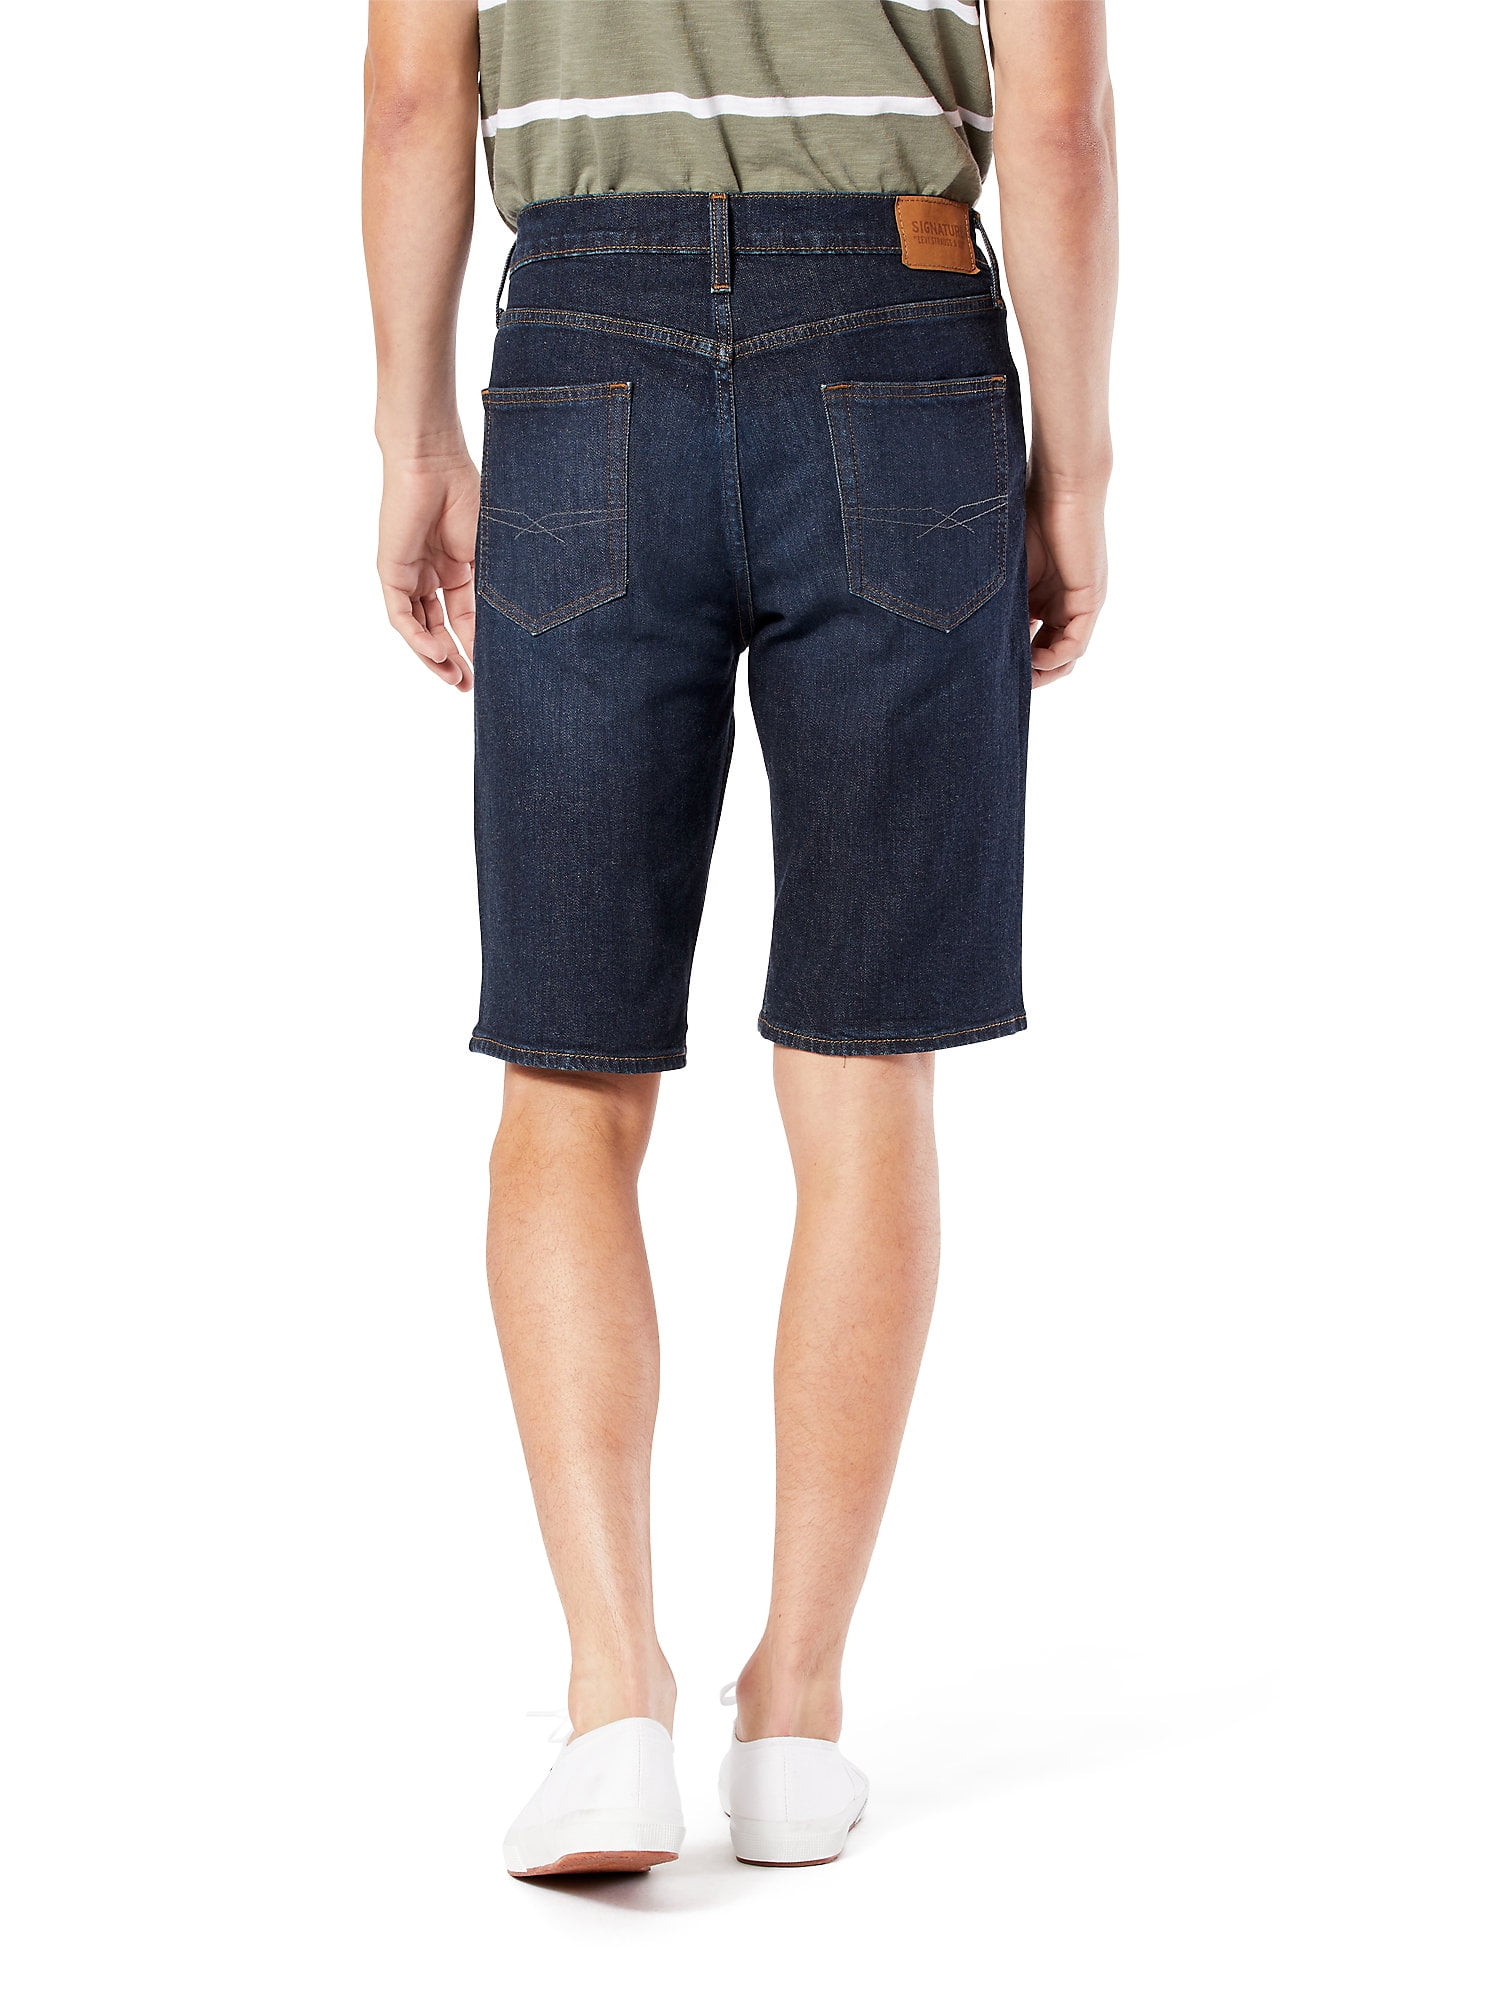 Signature by Levi Strauss & Co. Men's Jean Shorts